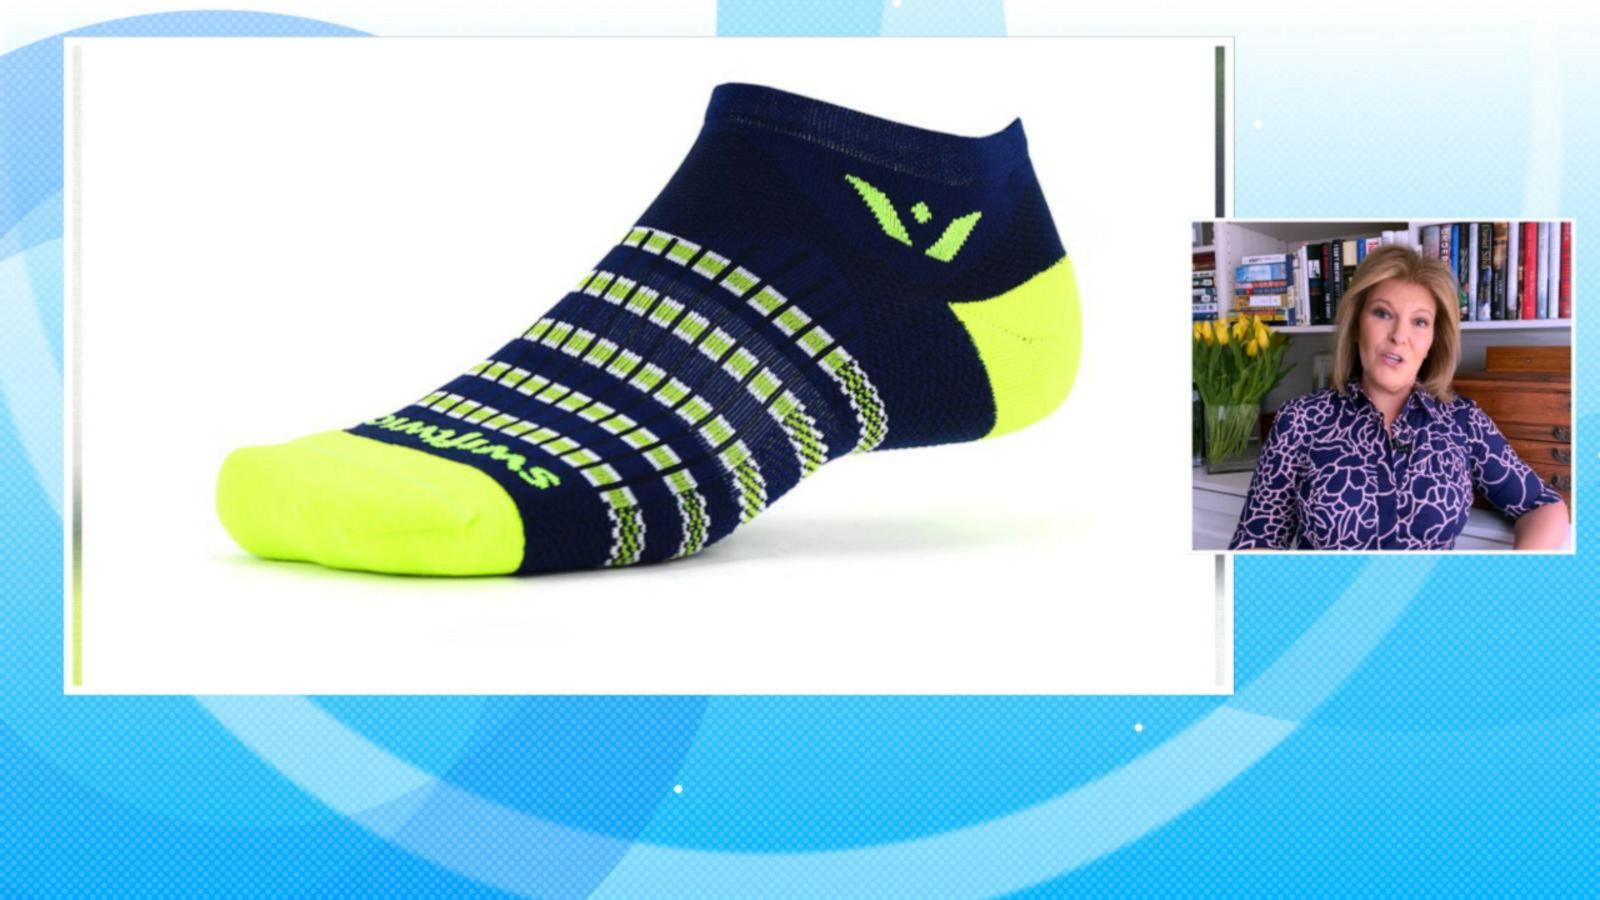 Compression socks for flying, exercise, and everyday wear - ABC News